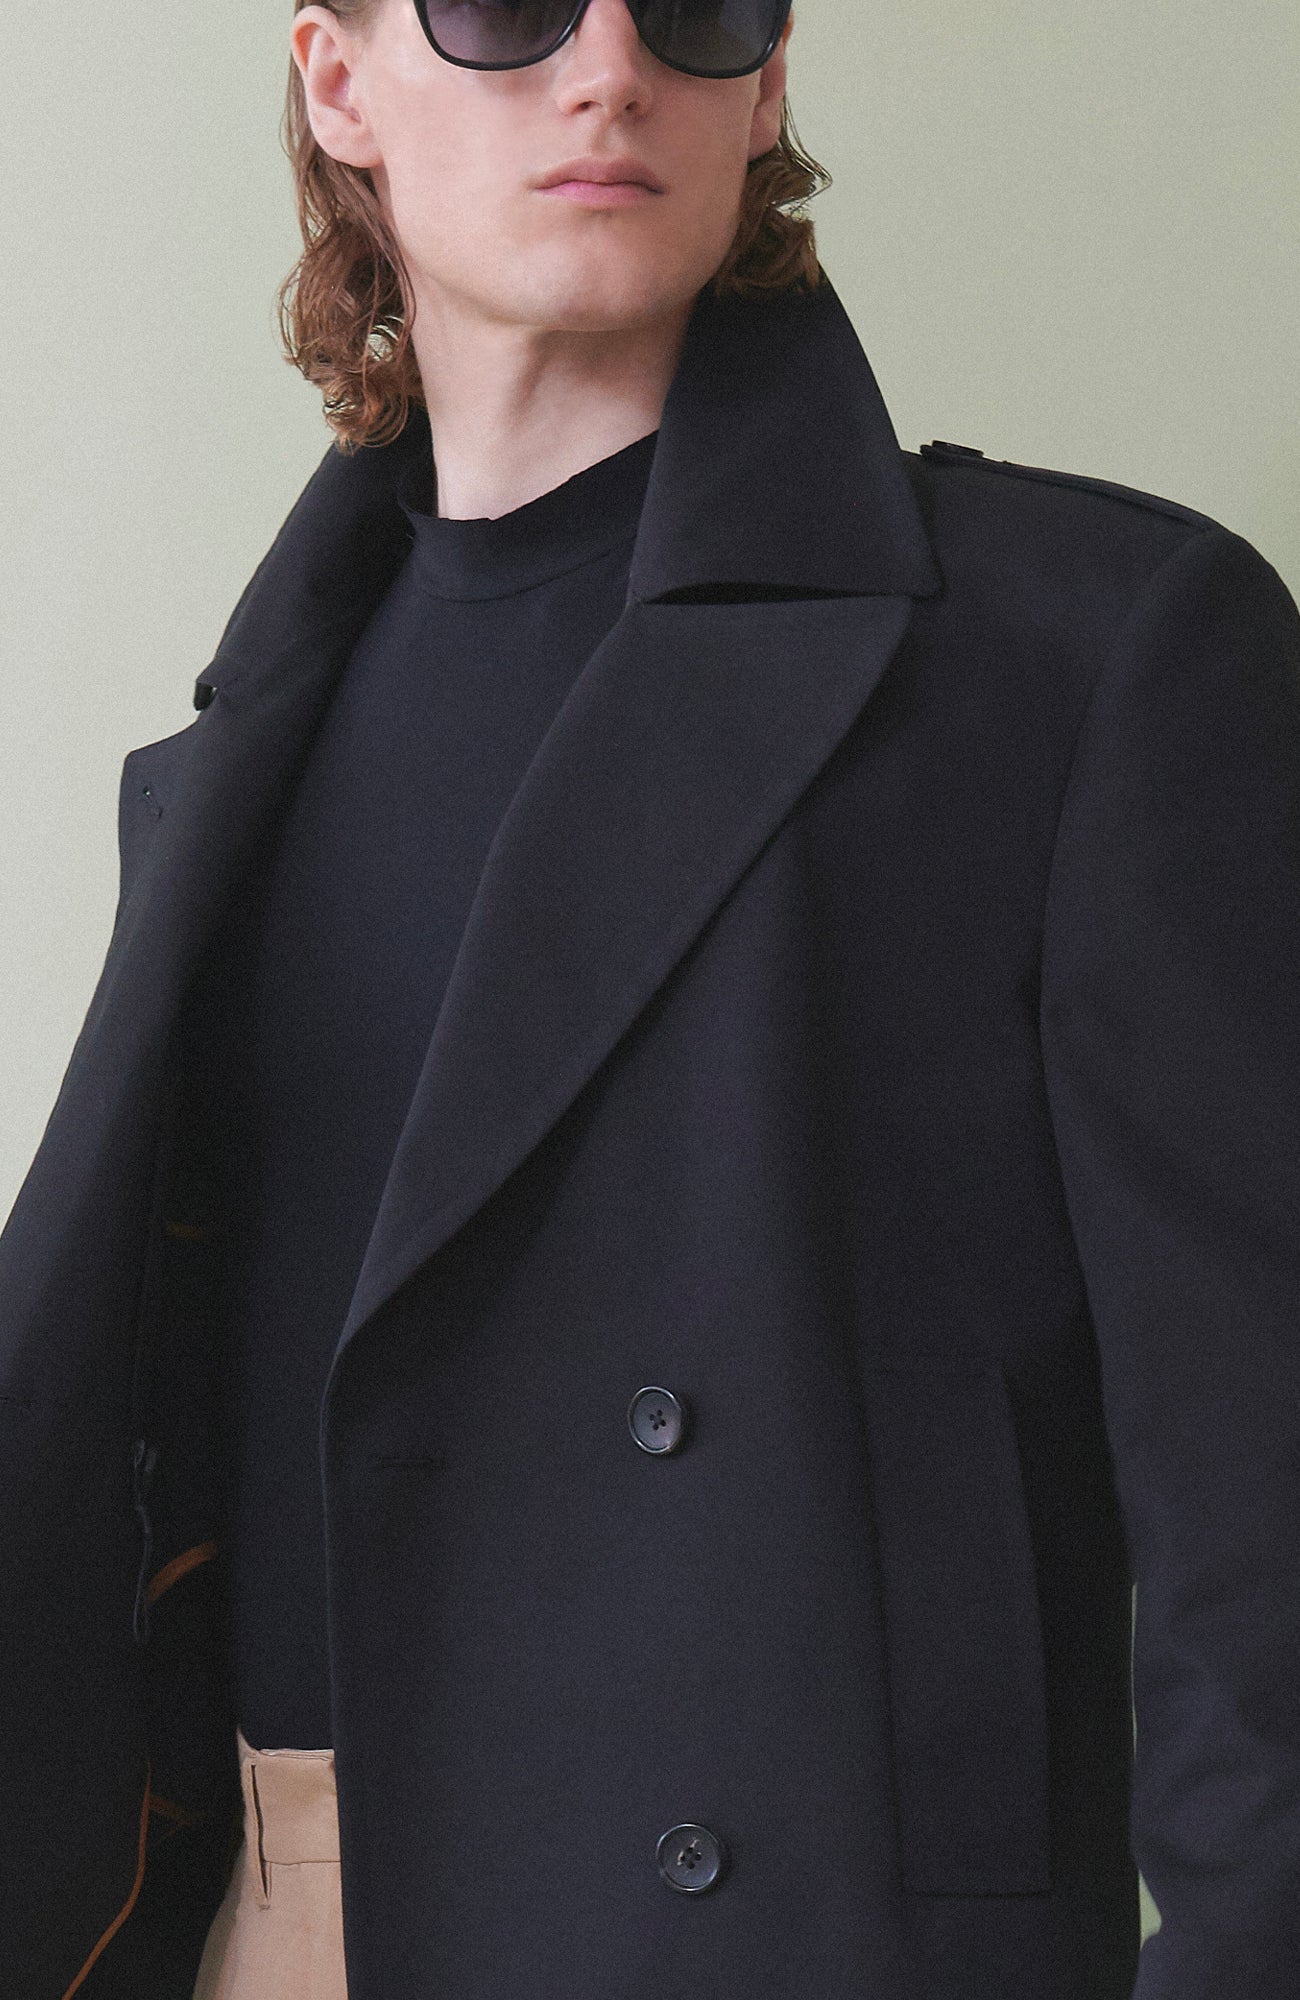 LIMITED EDITION: MYLO BLACK DOUBLE BREAST PEACOAT - MENS - Cardinal of Canada-CA - LIMITED EDITION: MYLO BLACK DOUBLE BREAST PEACOAT 28 INCH LENGTH